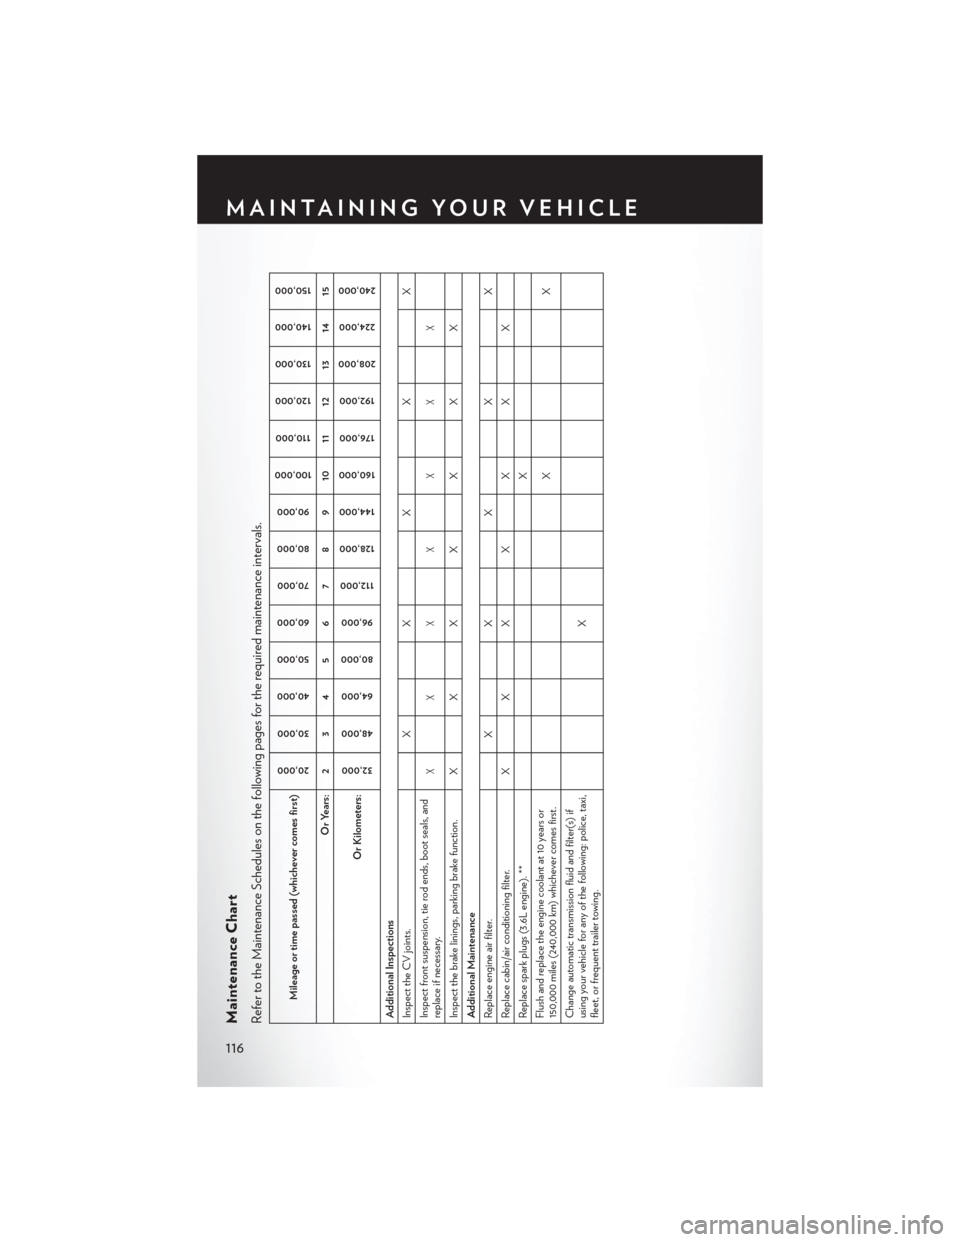 CHRYSLER TOWN AND COUNTRY 2013 5.G Owners Manual Maintenance ChartRefer to the Maintenance Schedules on the following pages for the required maintenance intervals.
Mileage or time passed (whichever comes first)
20,00030,000
40,000 50,000
60,000 70,0